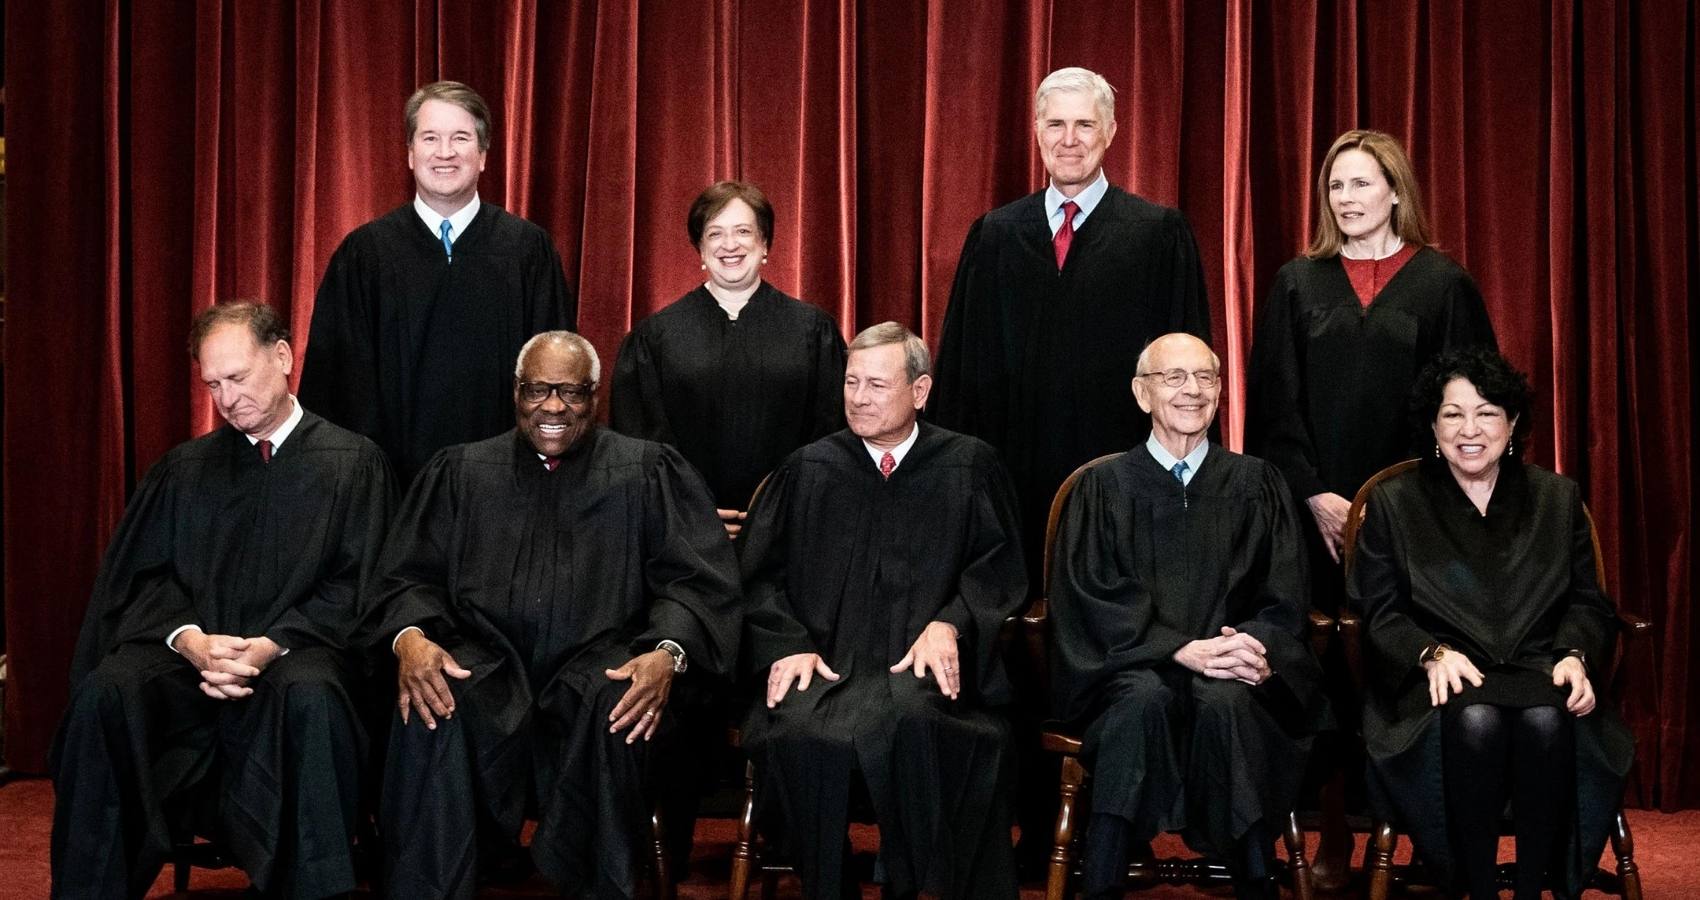 A Conservative US Supreme Court Concludes With Lasting Legacy